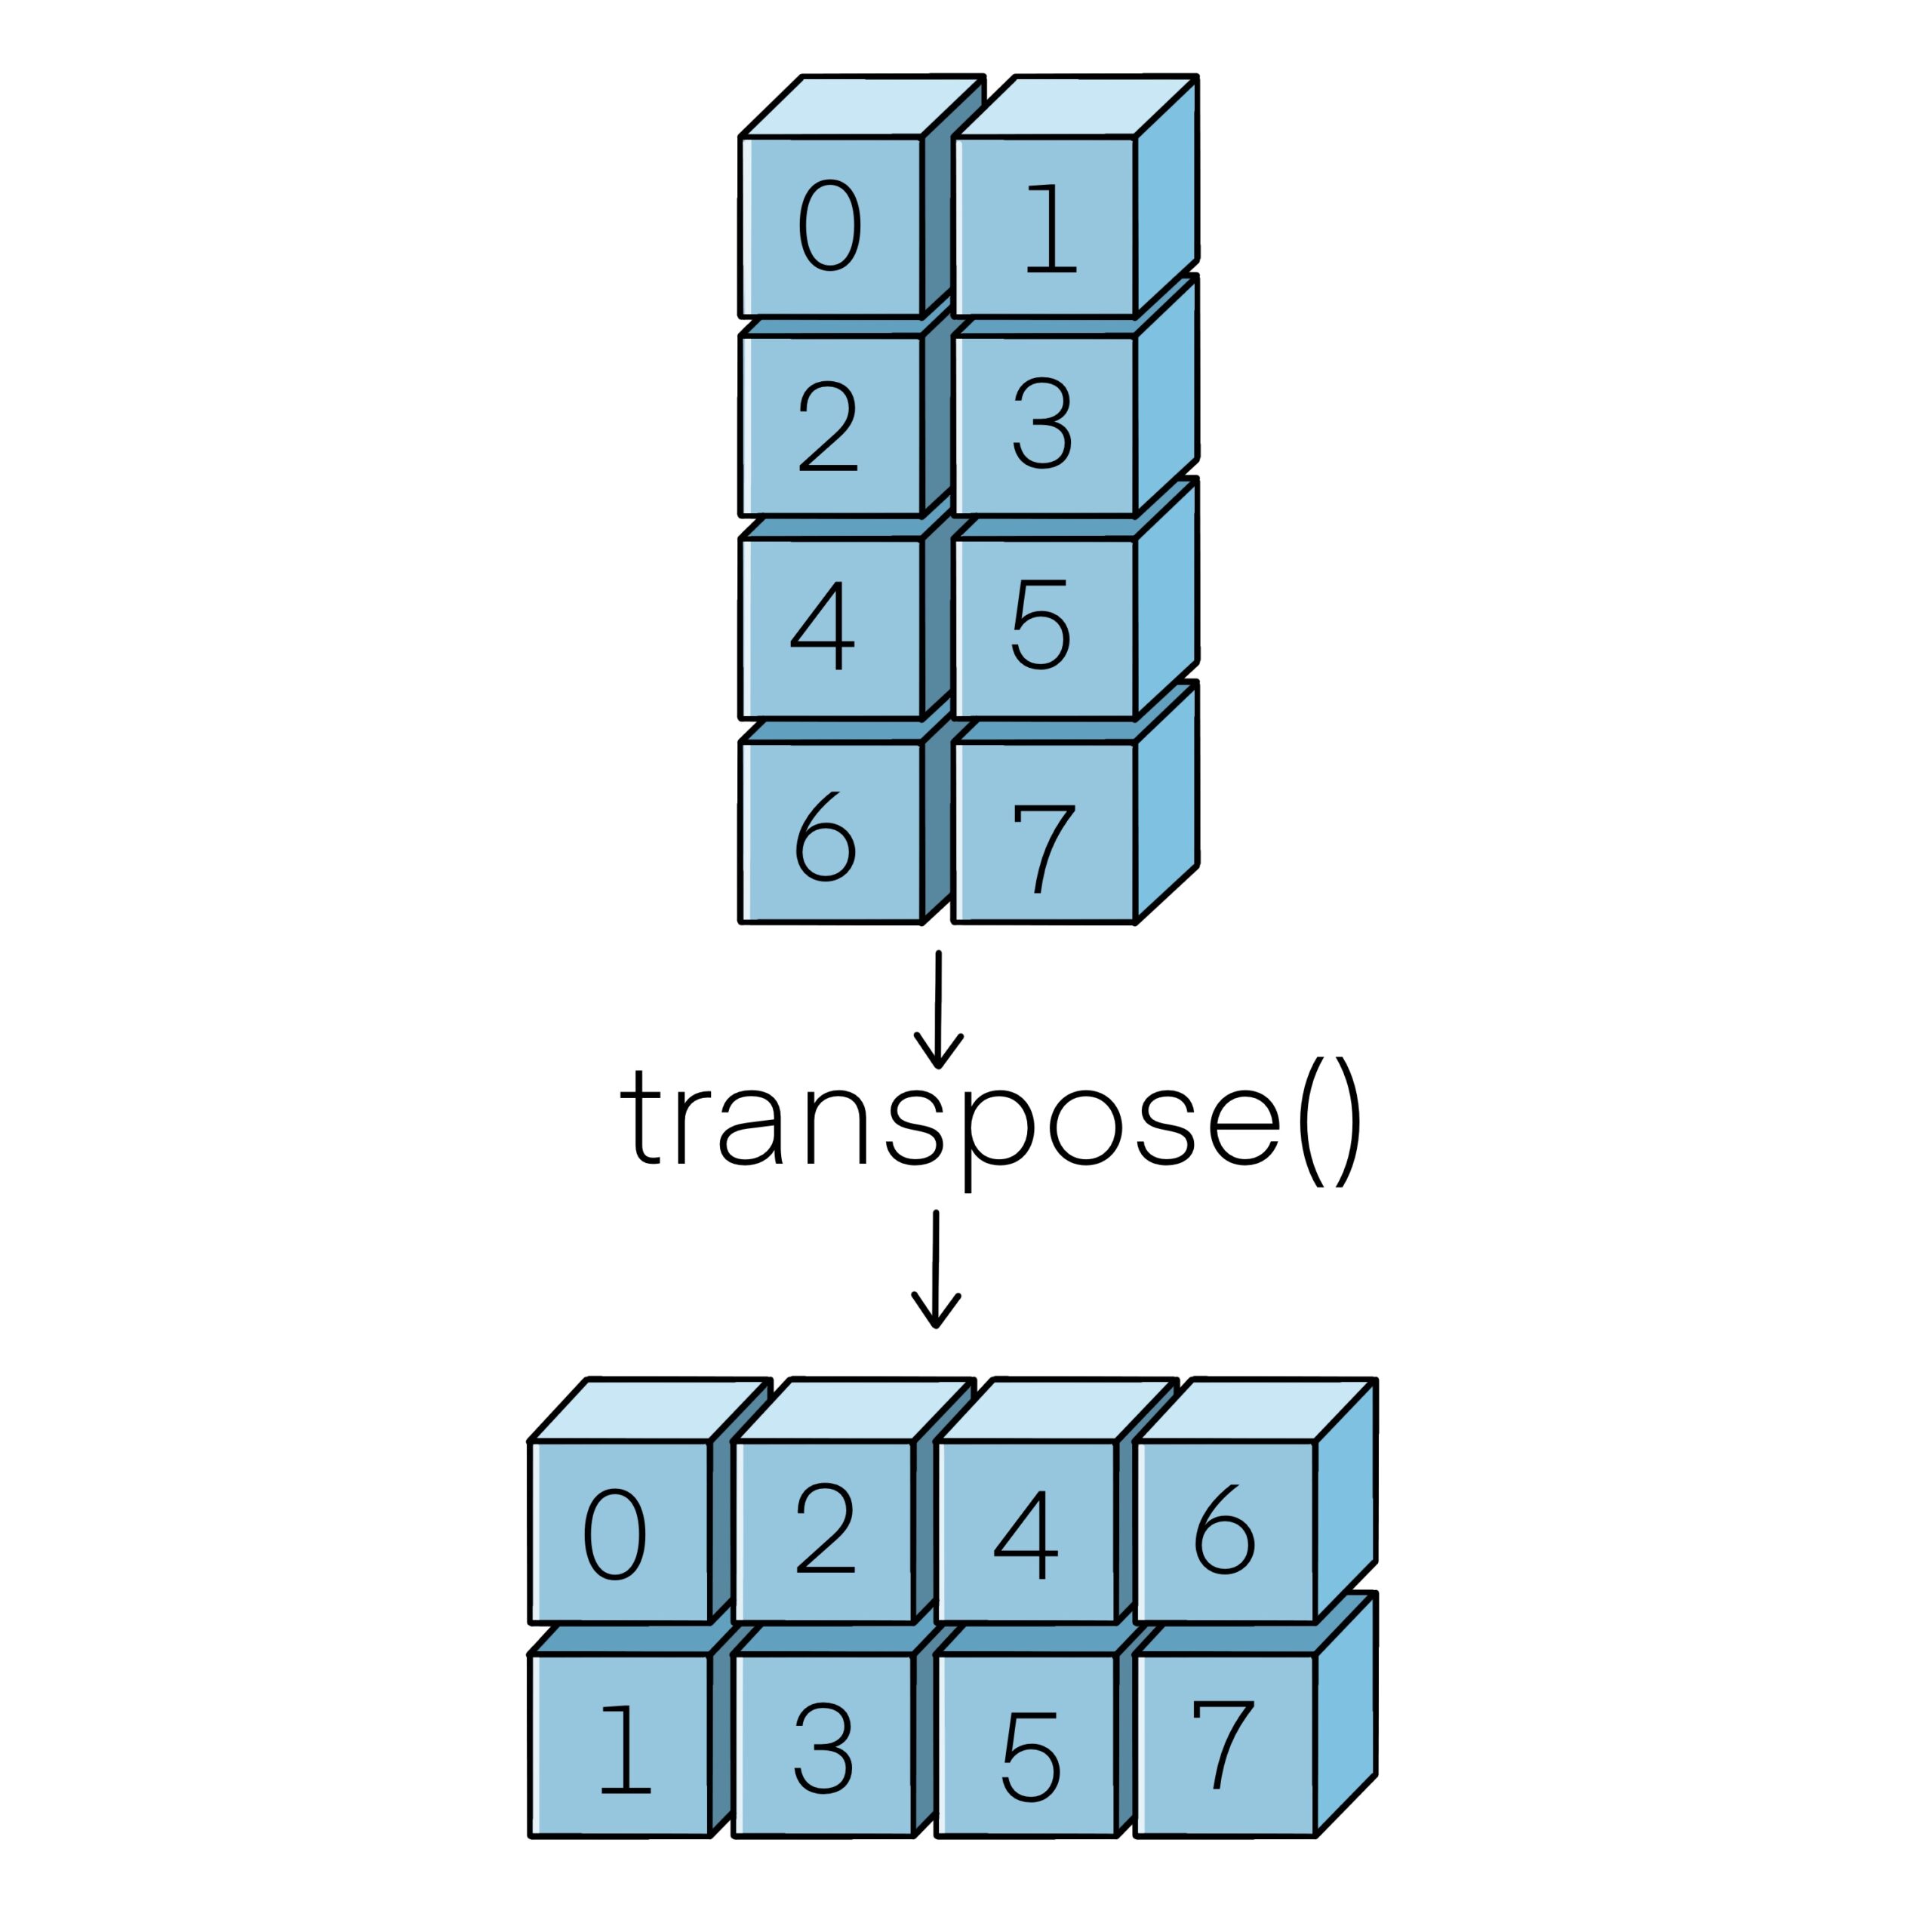 2D array transposed